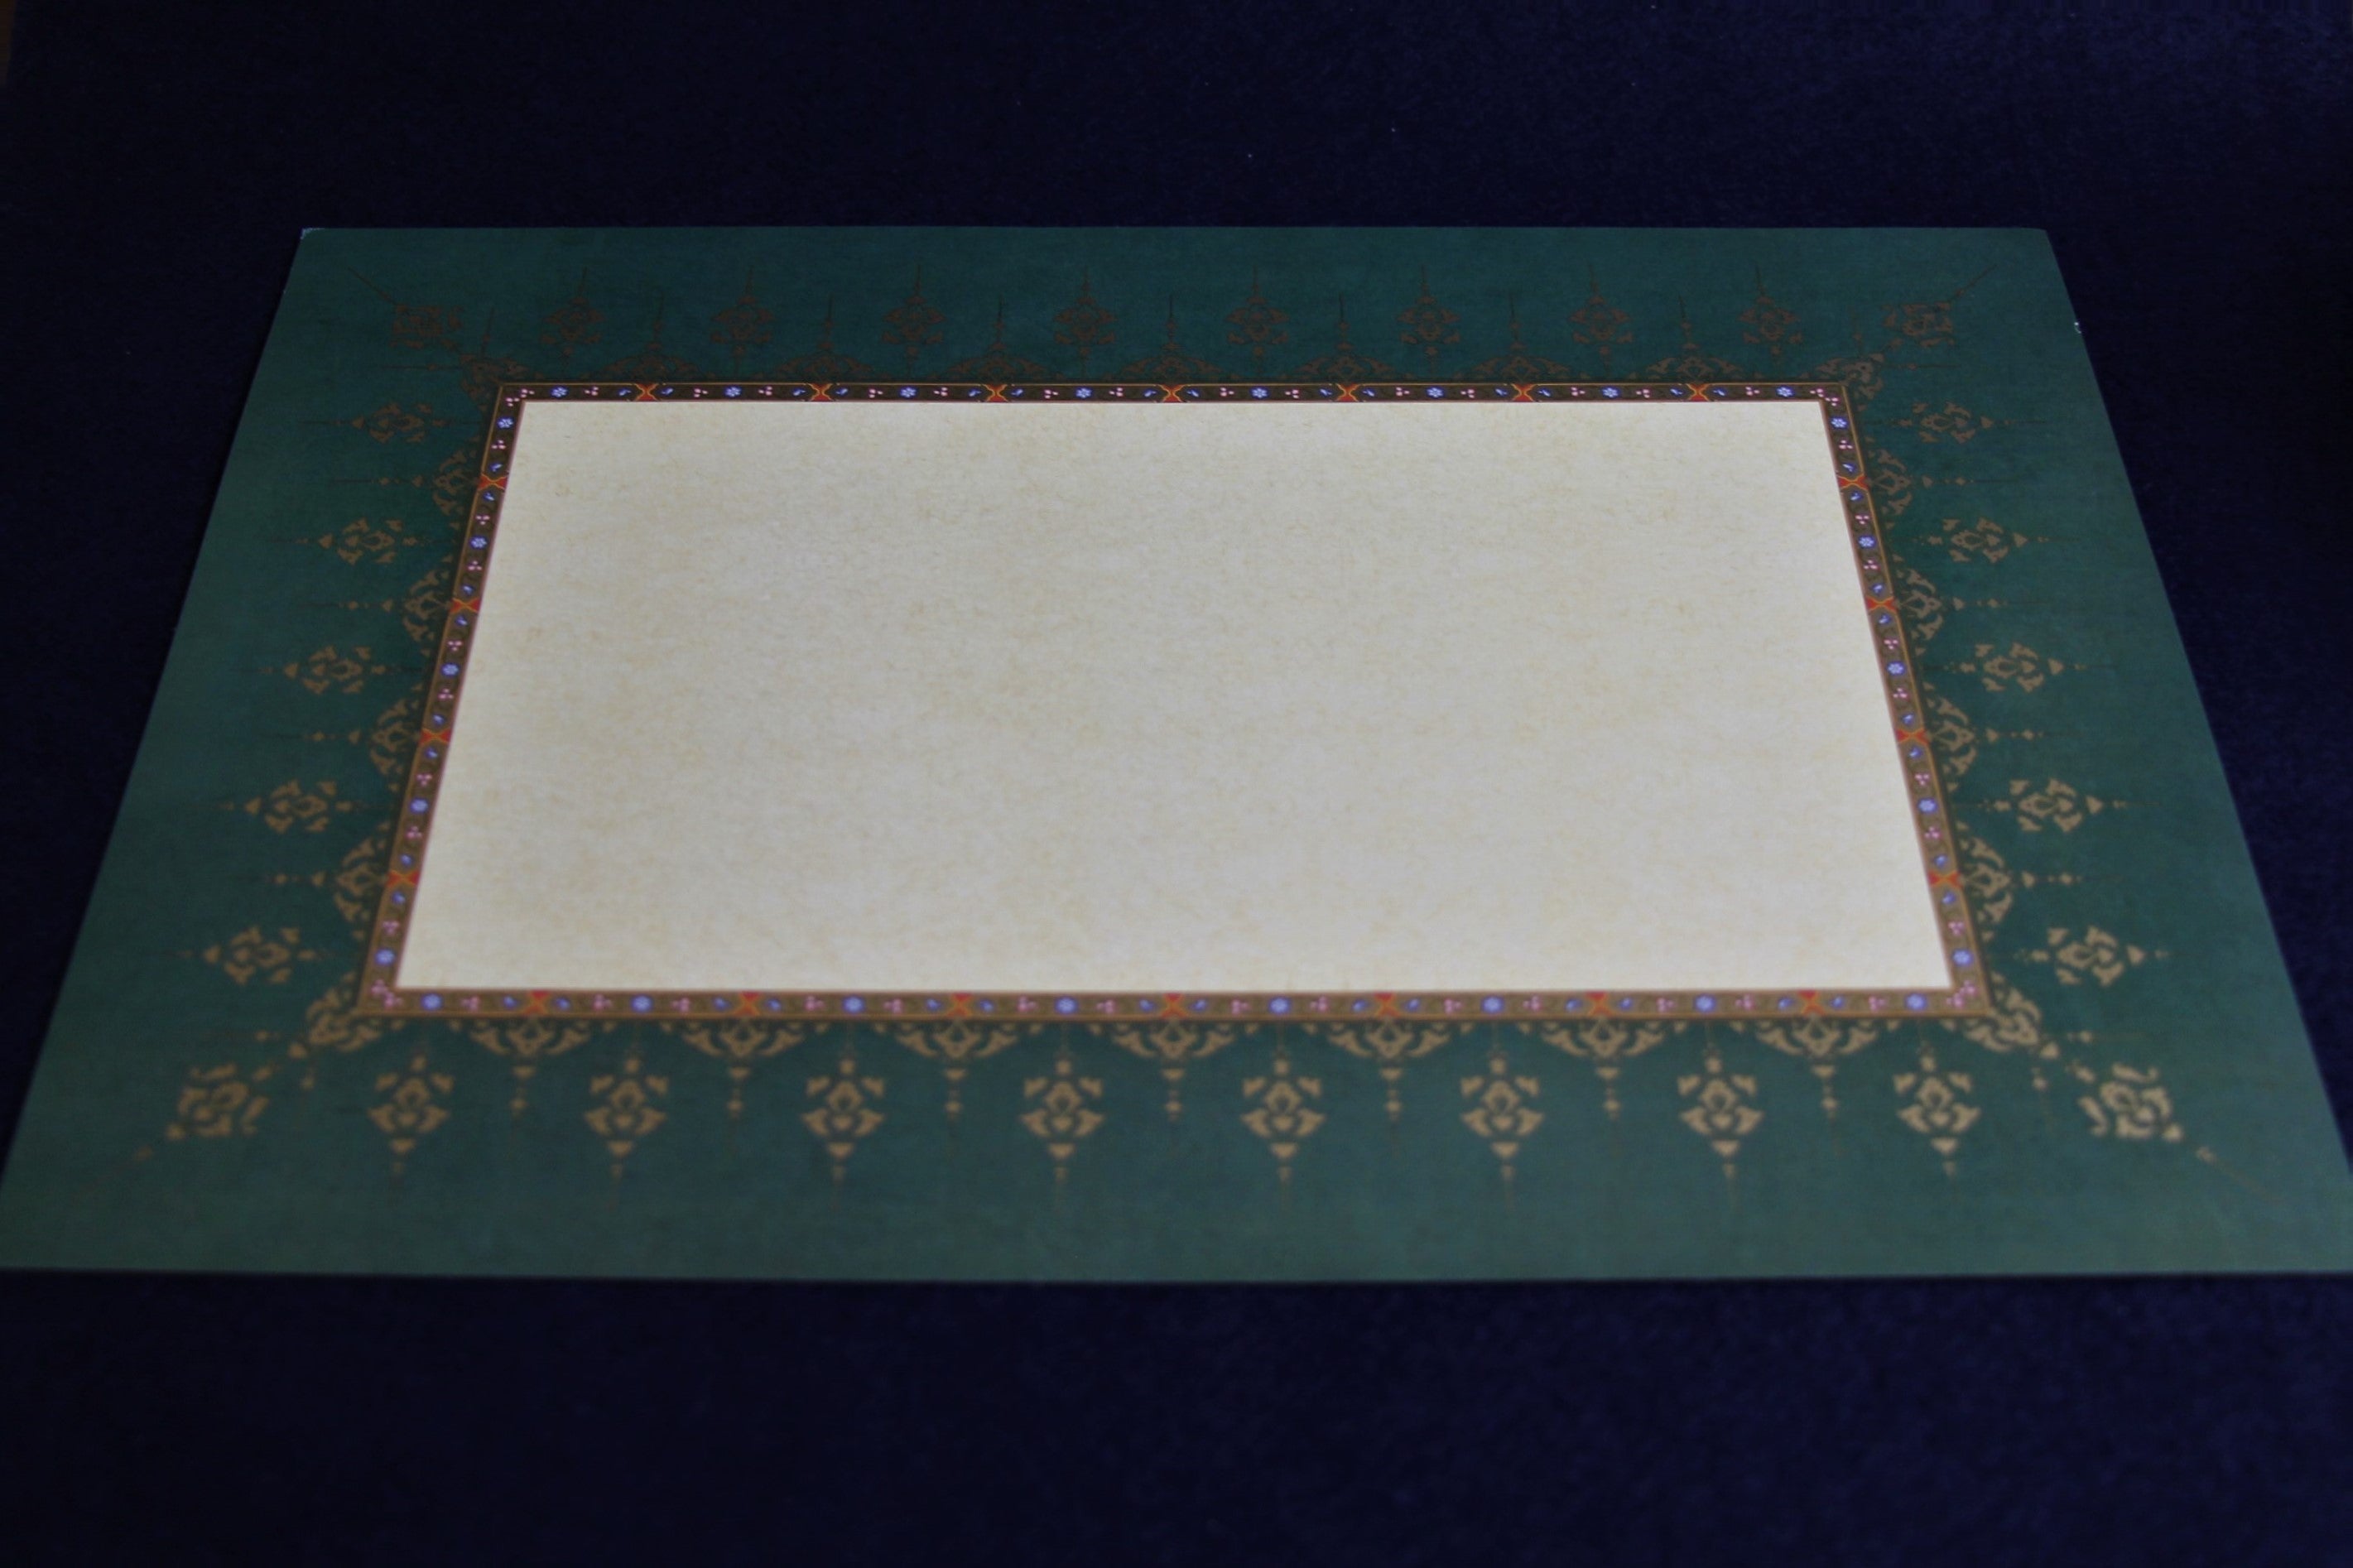 Loose sheets of paper for Arabic calligraphy with illuminated borders - pattern 7